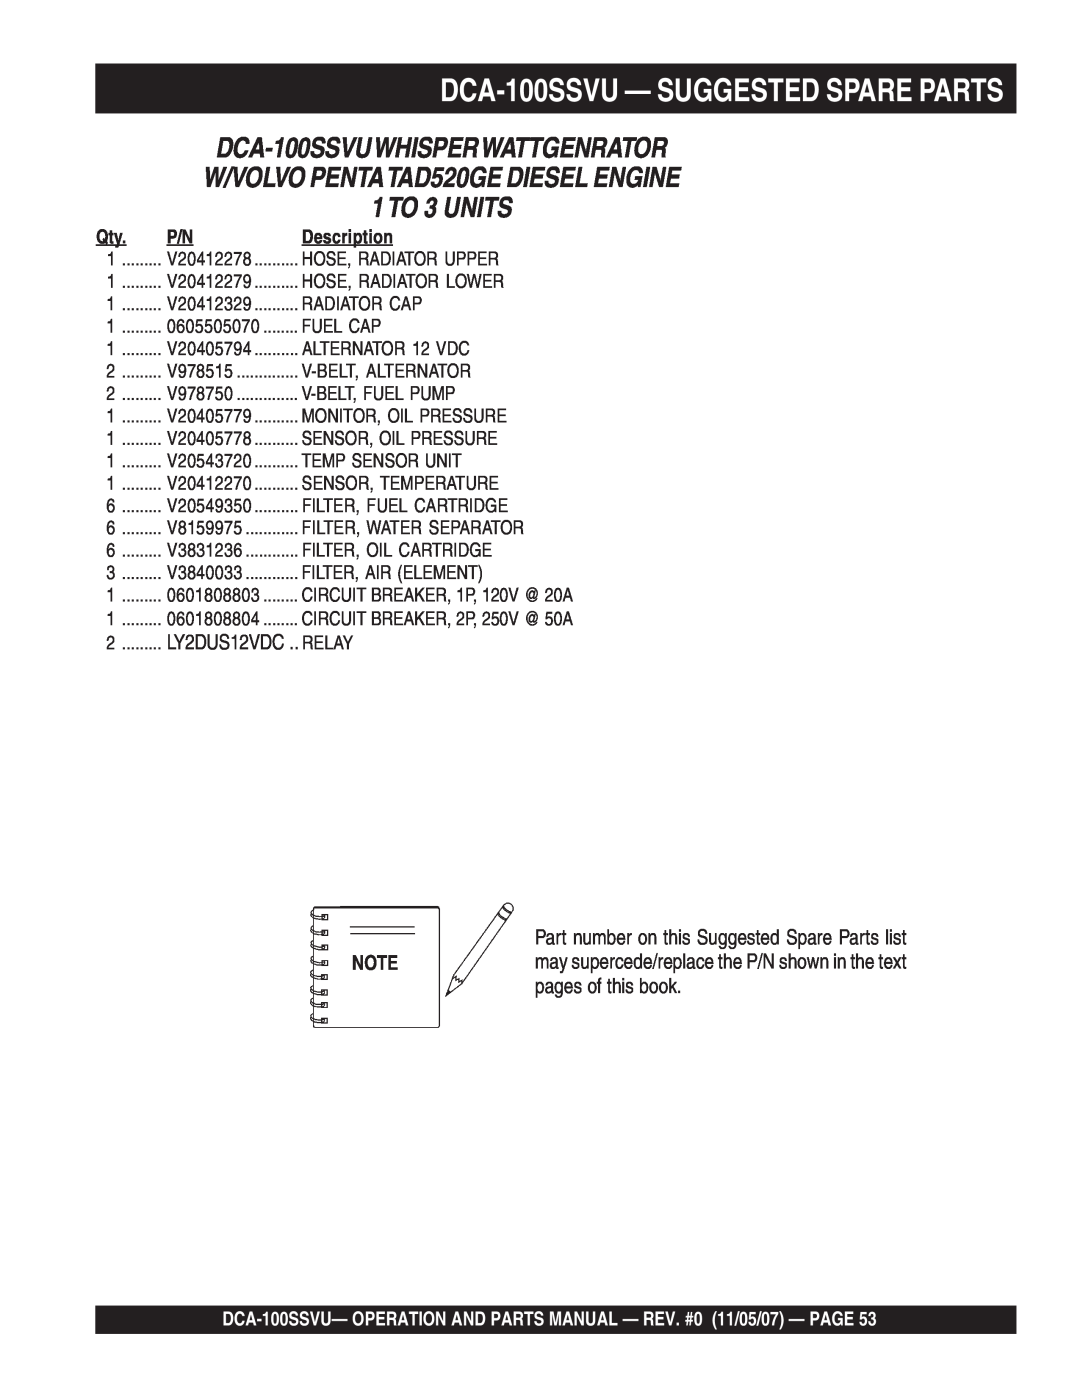 Multiquip operation manual DCA-100SSVU— SUGGESTED SPARE PARTS, Part number on this Suggested Spare Parts list 